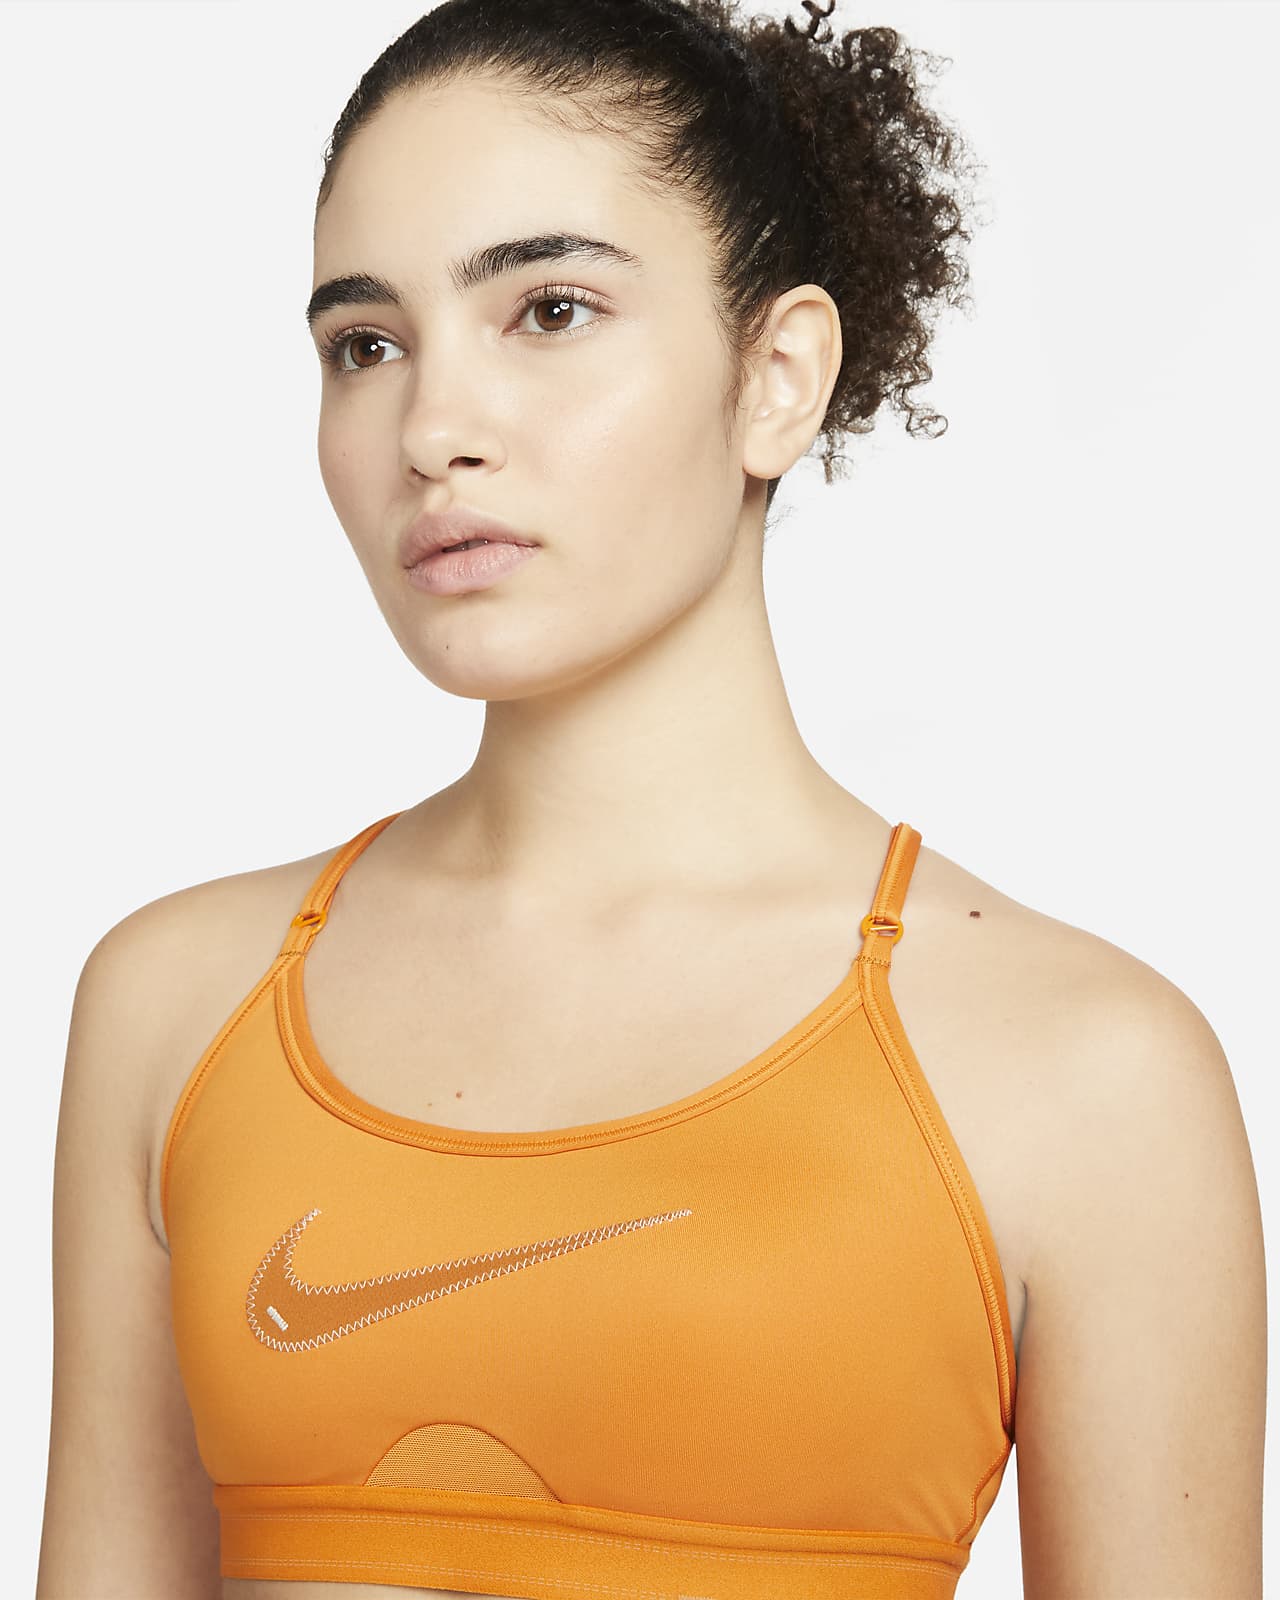 Nike Indy Women's Light-Support Padded Graphic Sports Bra. Nike SI